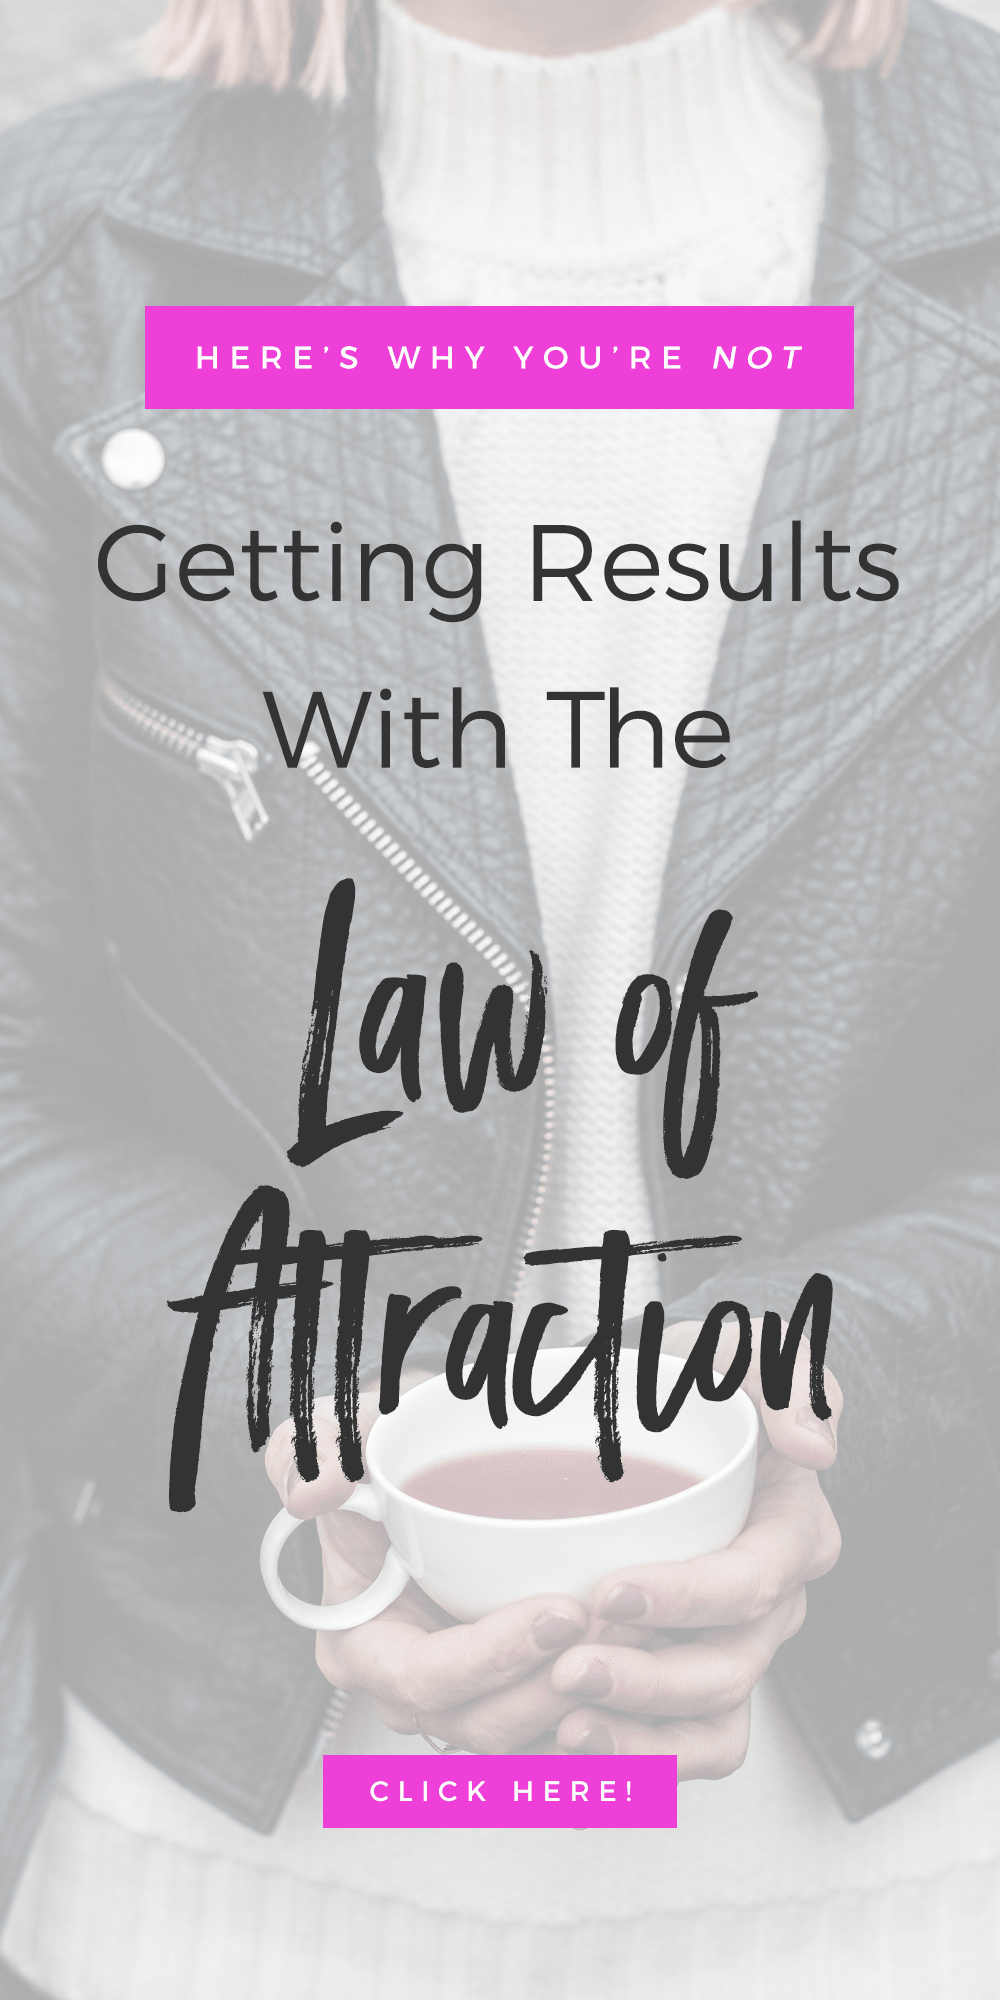 Here's Why You're Not Getting Results With The Law of Attraction